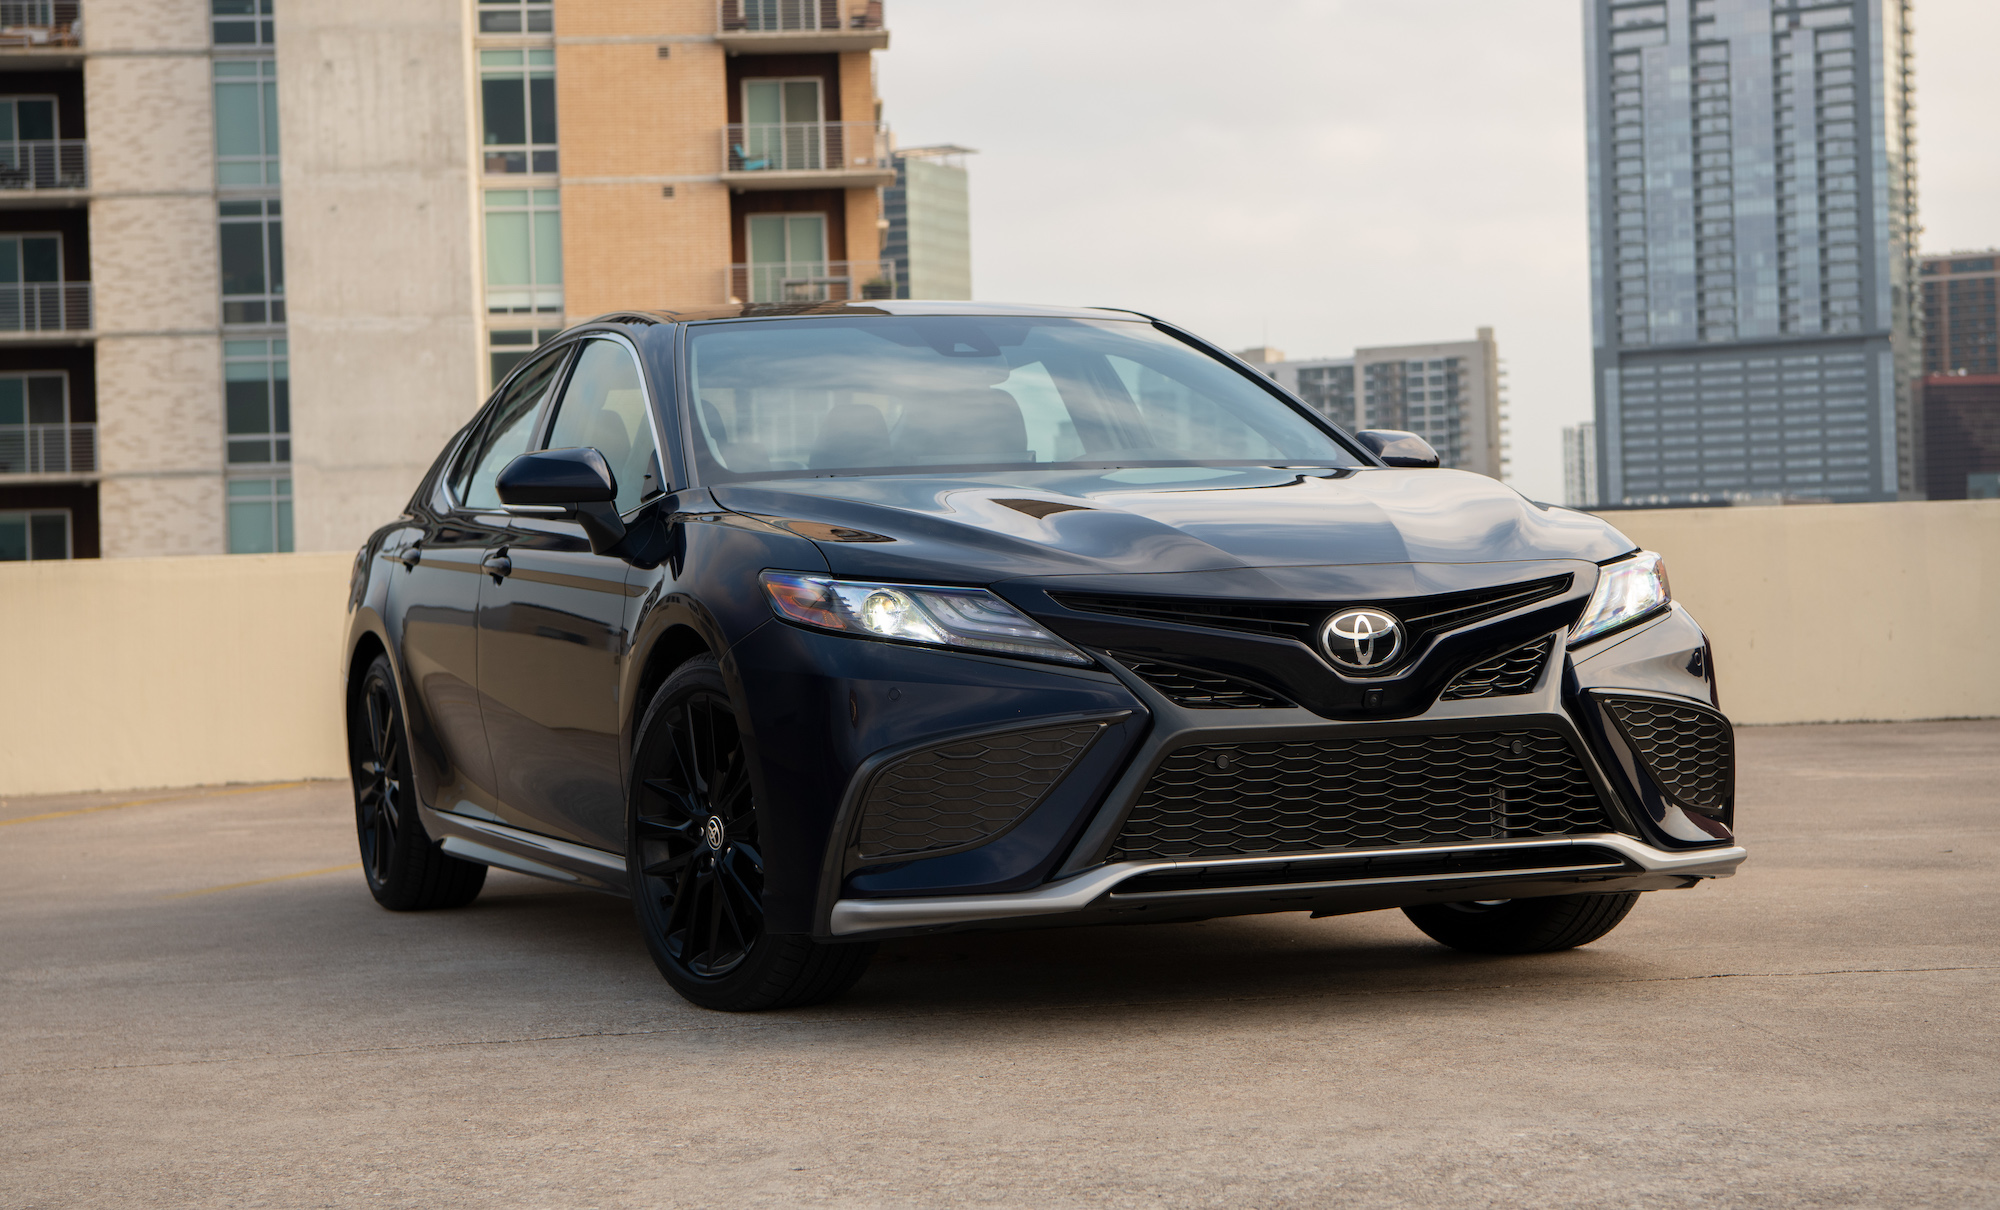 Toyota Camry SE and XSE Can't Compete With 'Truly Sporty' TRD